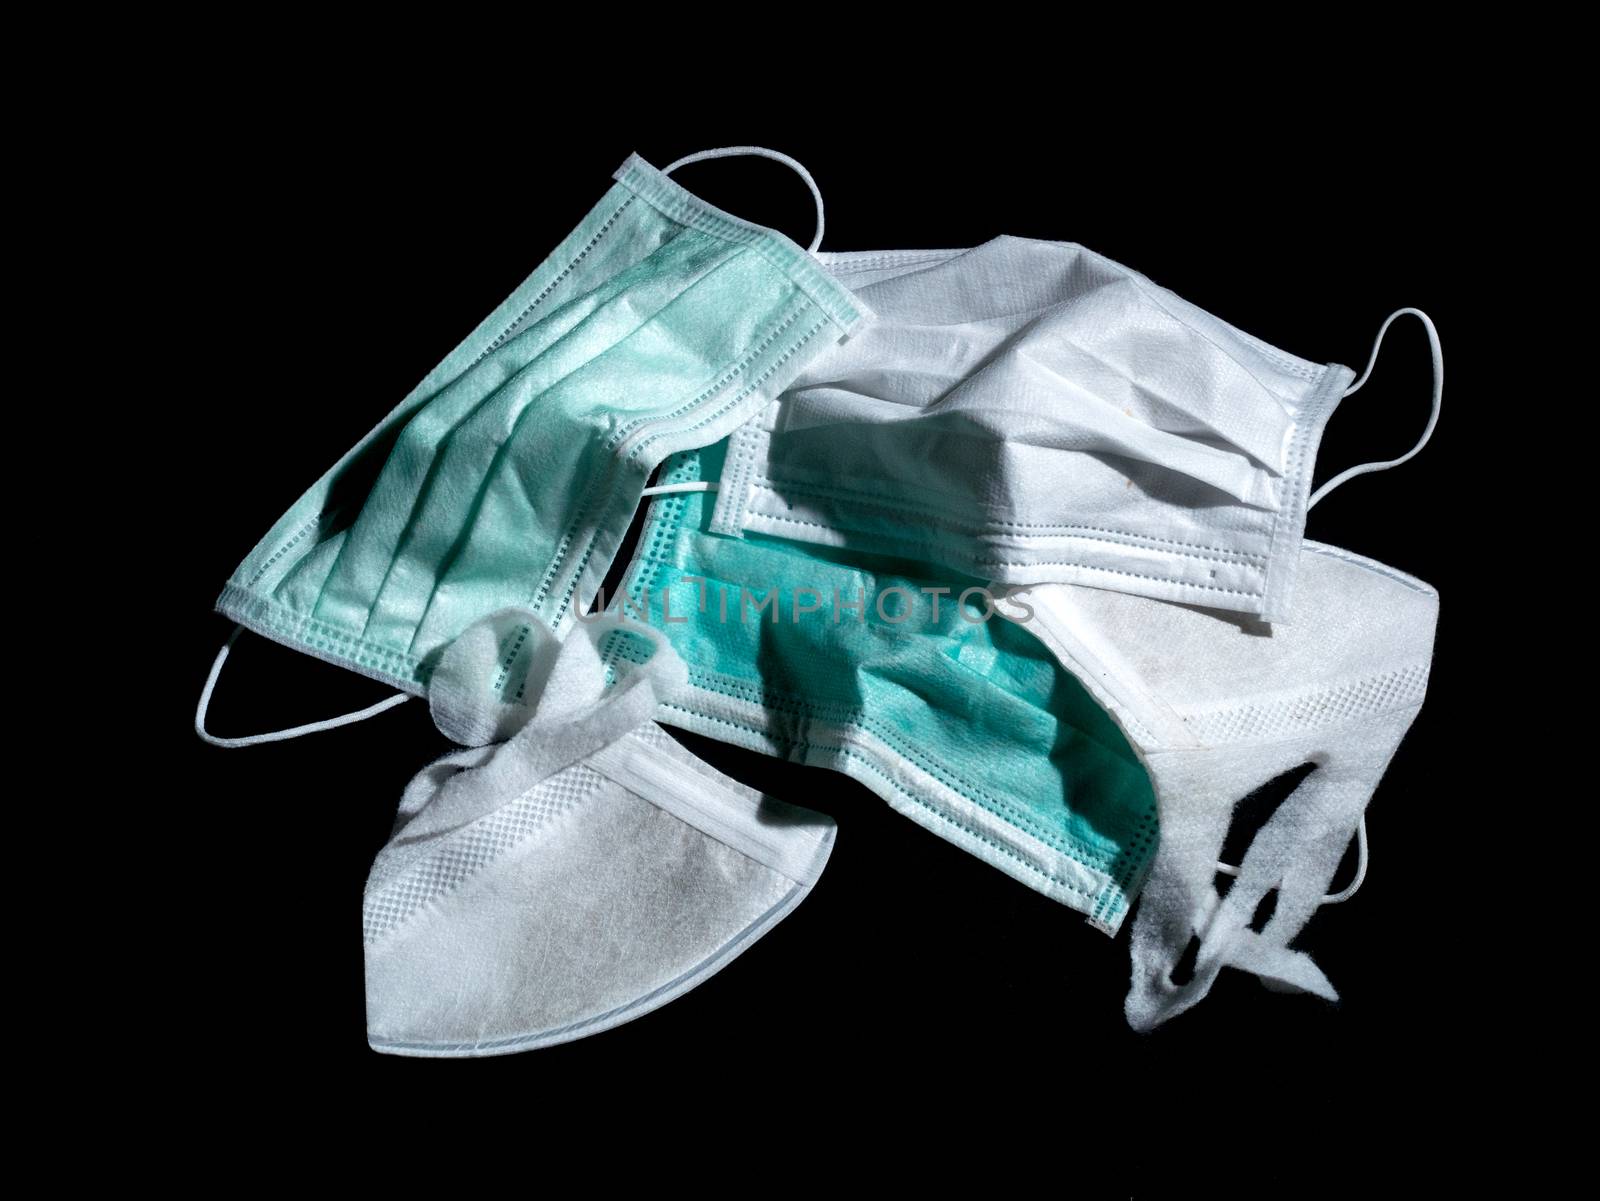 used surgical masks and used PM2.5 masks place on black background  dark tone. Properly discarded mask concept.